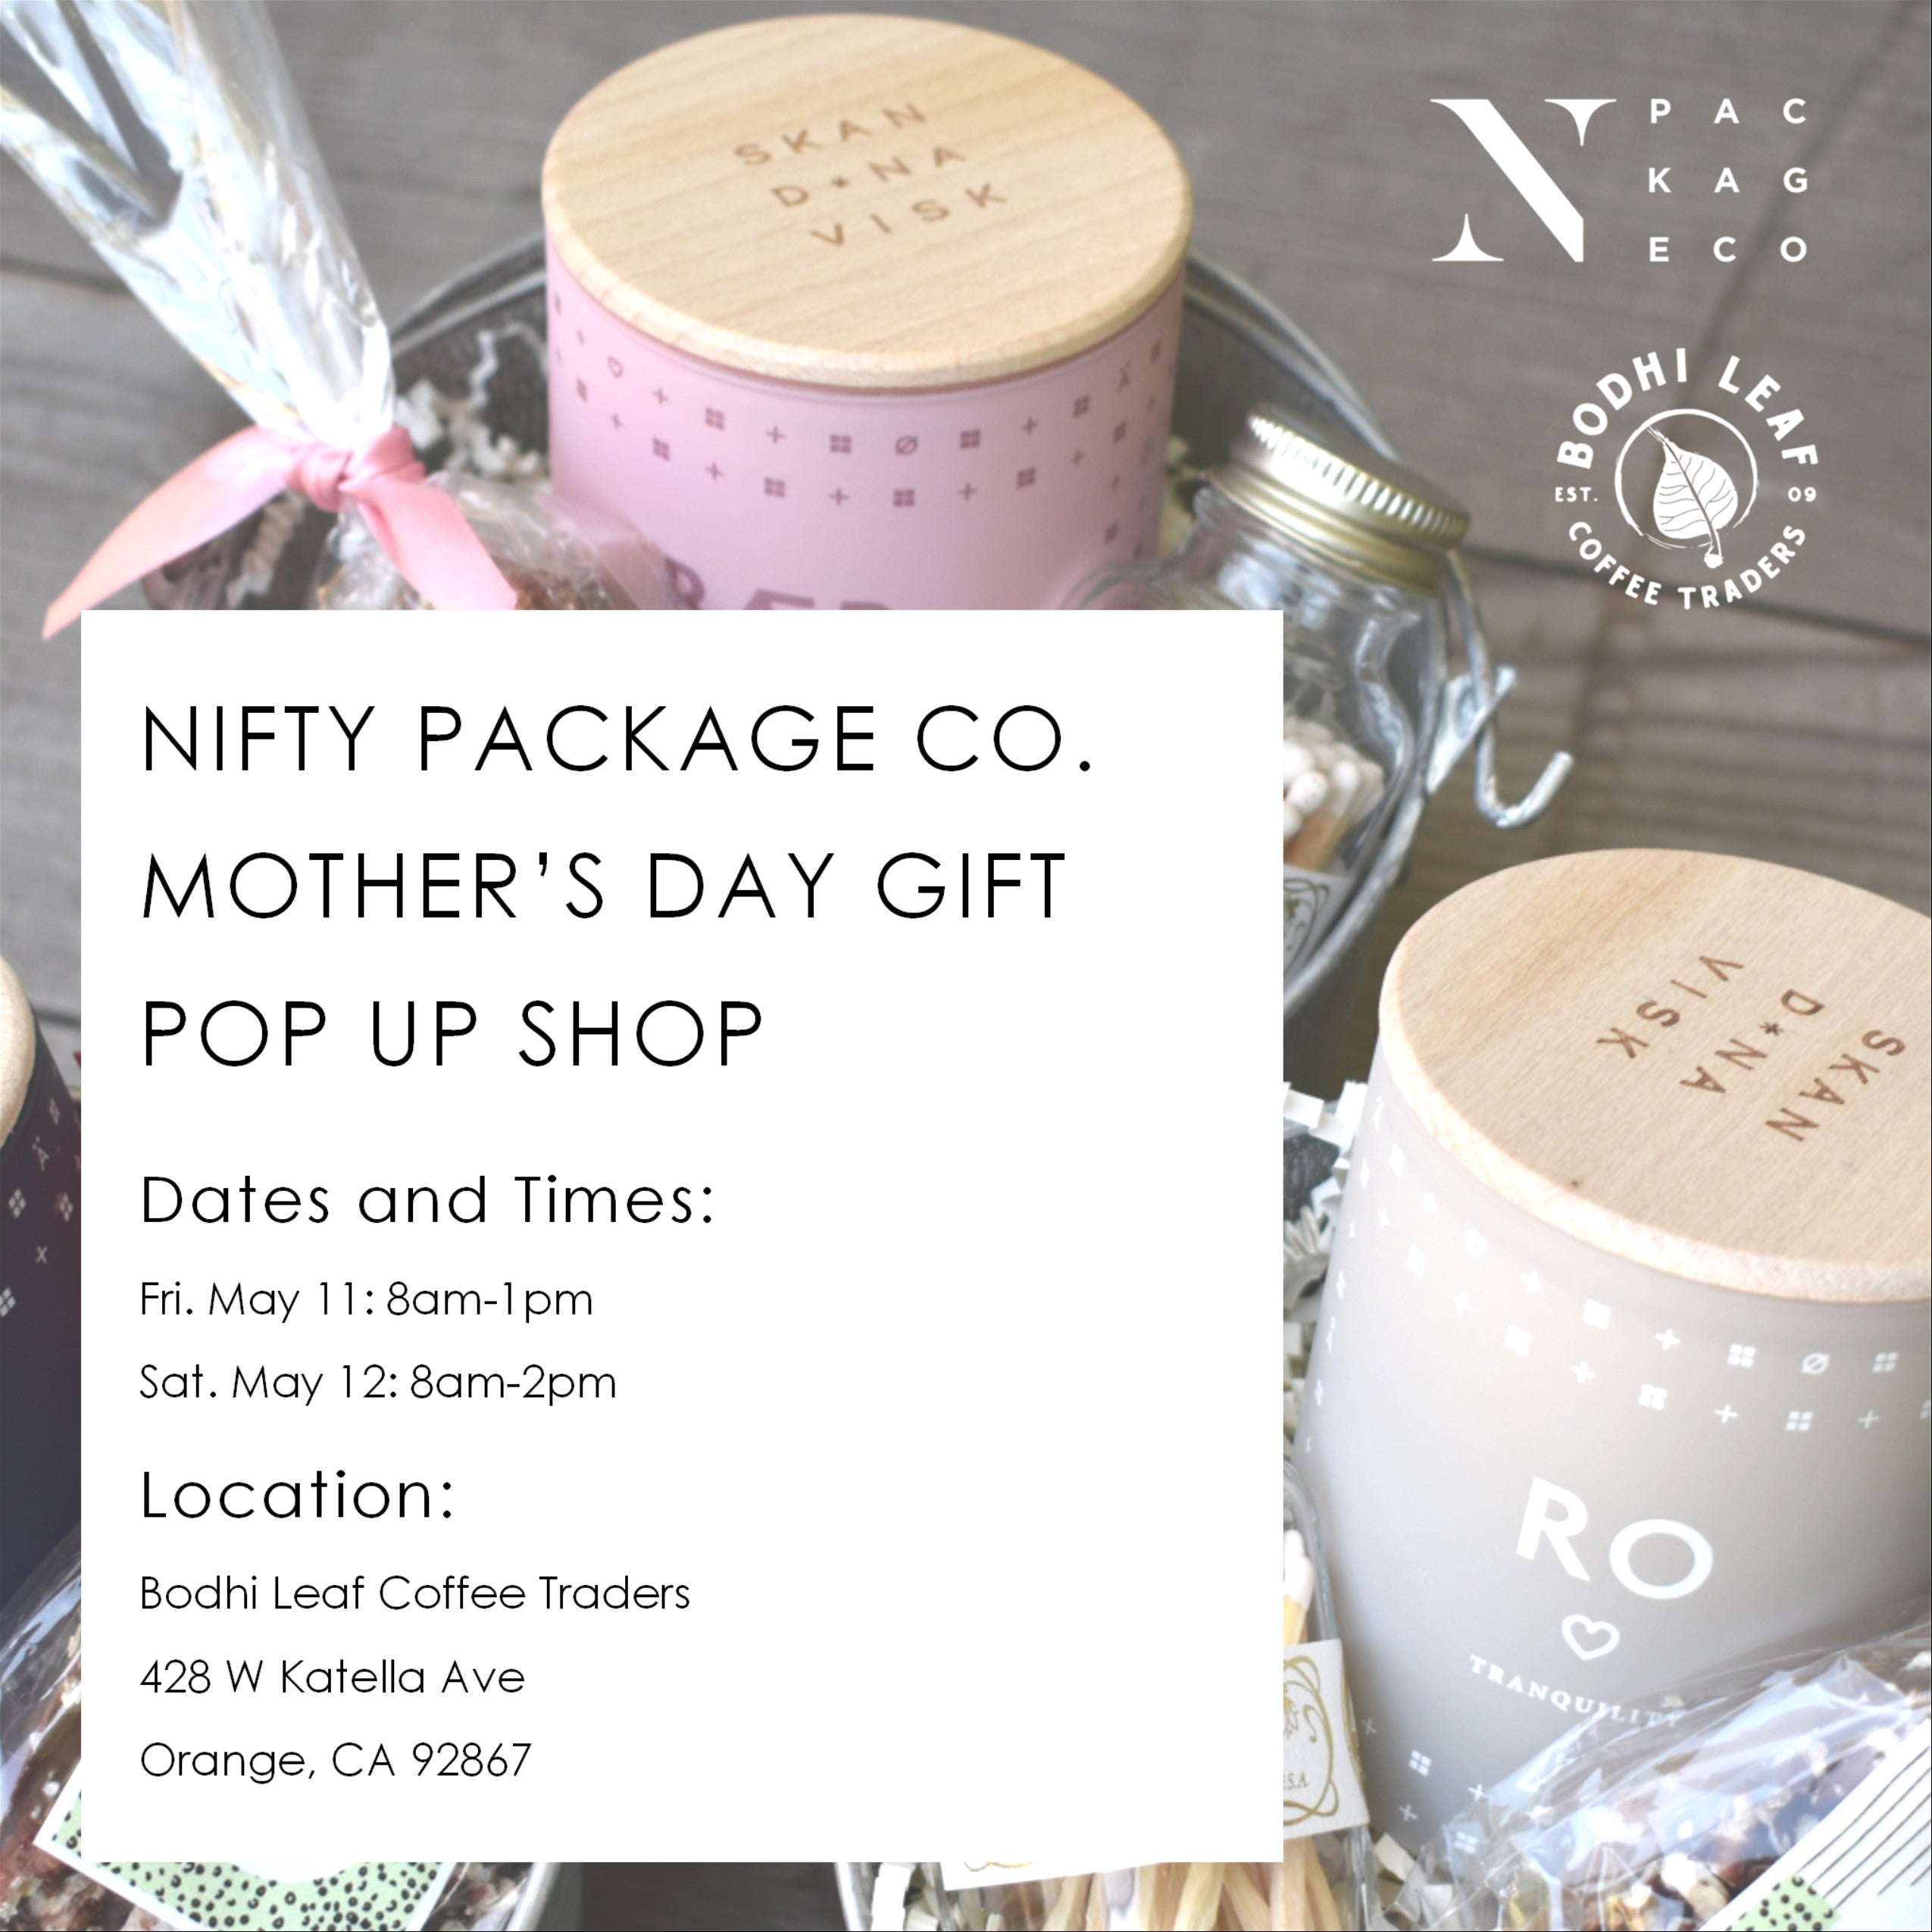 Stop by our pop-up shop to purchase a Mother's Day gift!